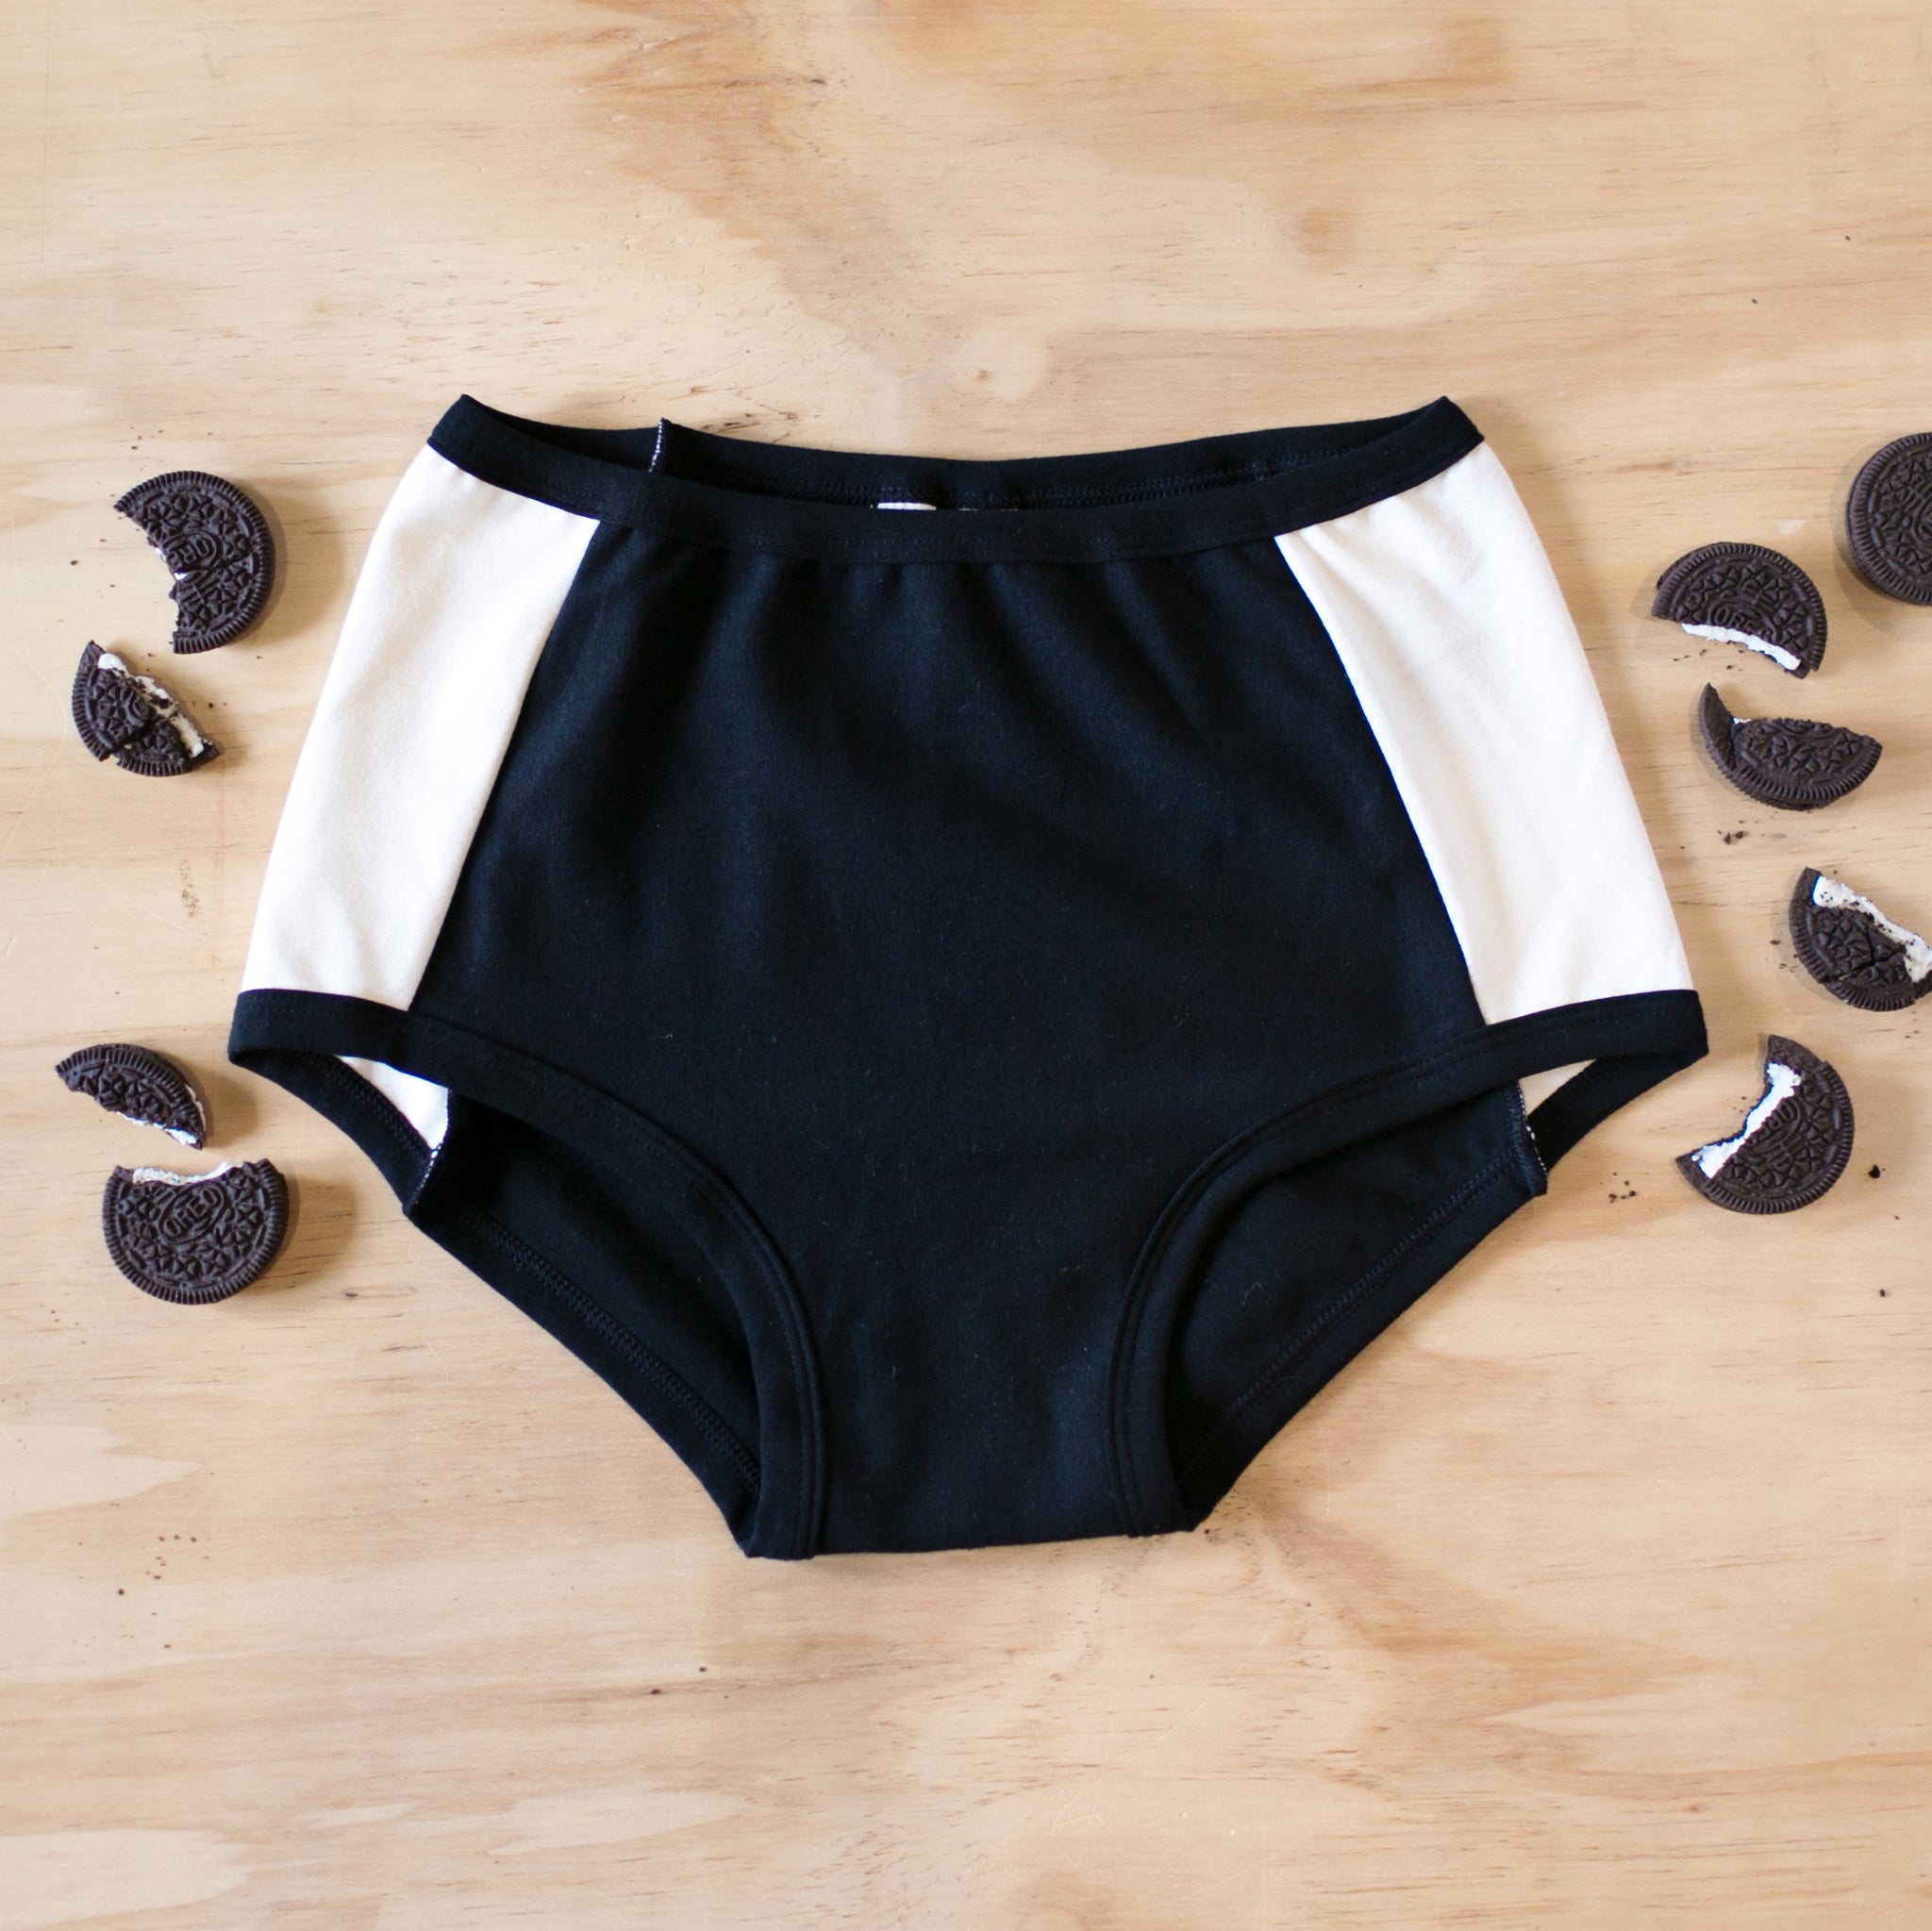 Flat lay of Thunderpants Panel Pant Original style underwear in Cookies and Cream - black center and white sides.